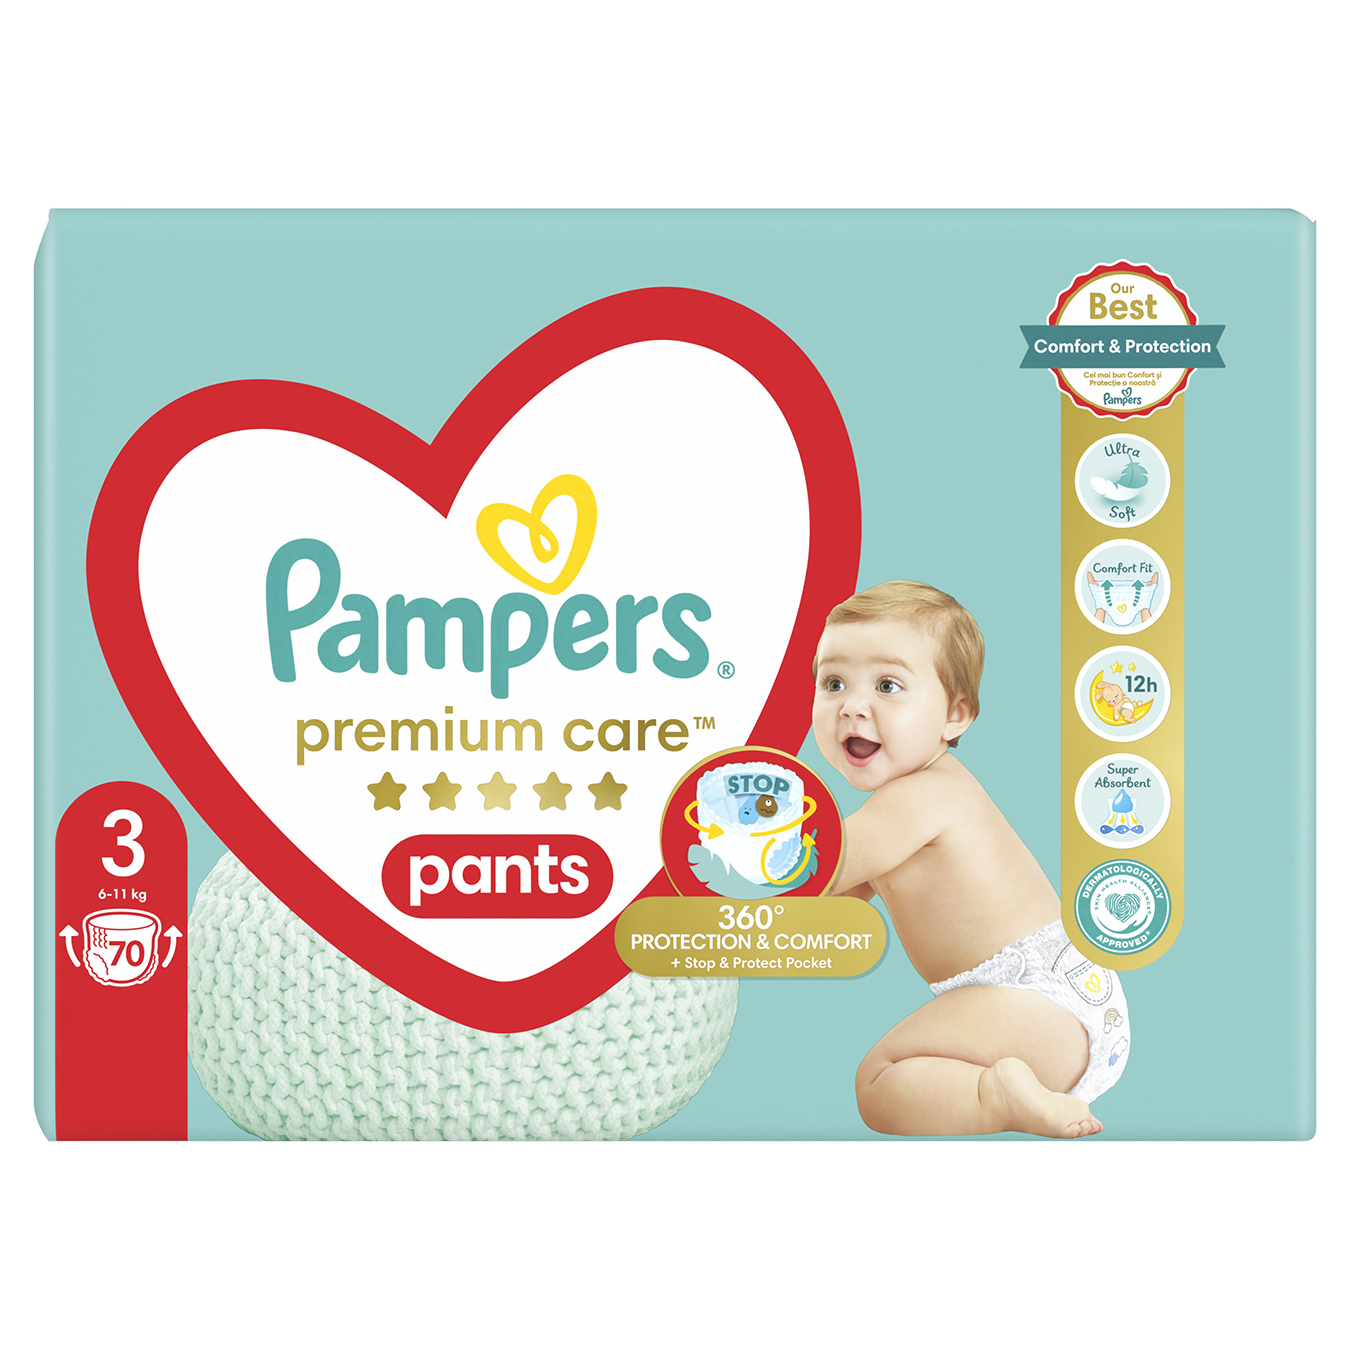 from at a 70 Pampers good Pants pcs Novus Buy price 6-11 children kg Care diapers-panties Premium ᐈ for Midi